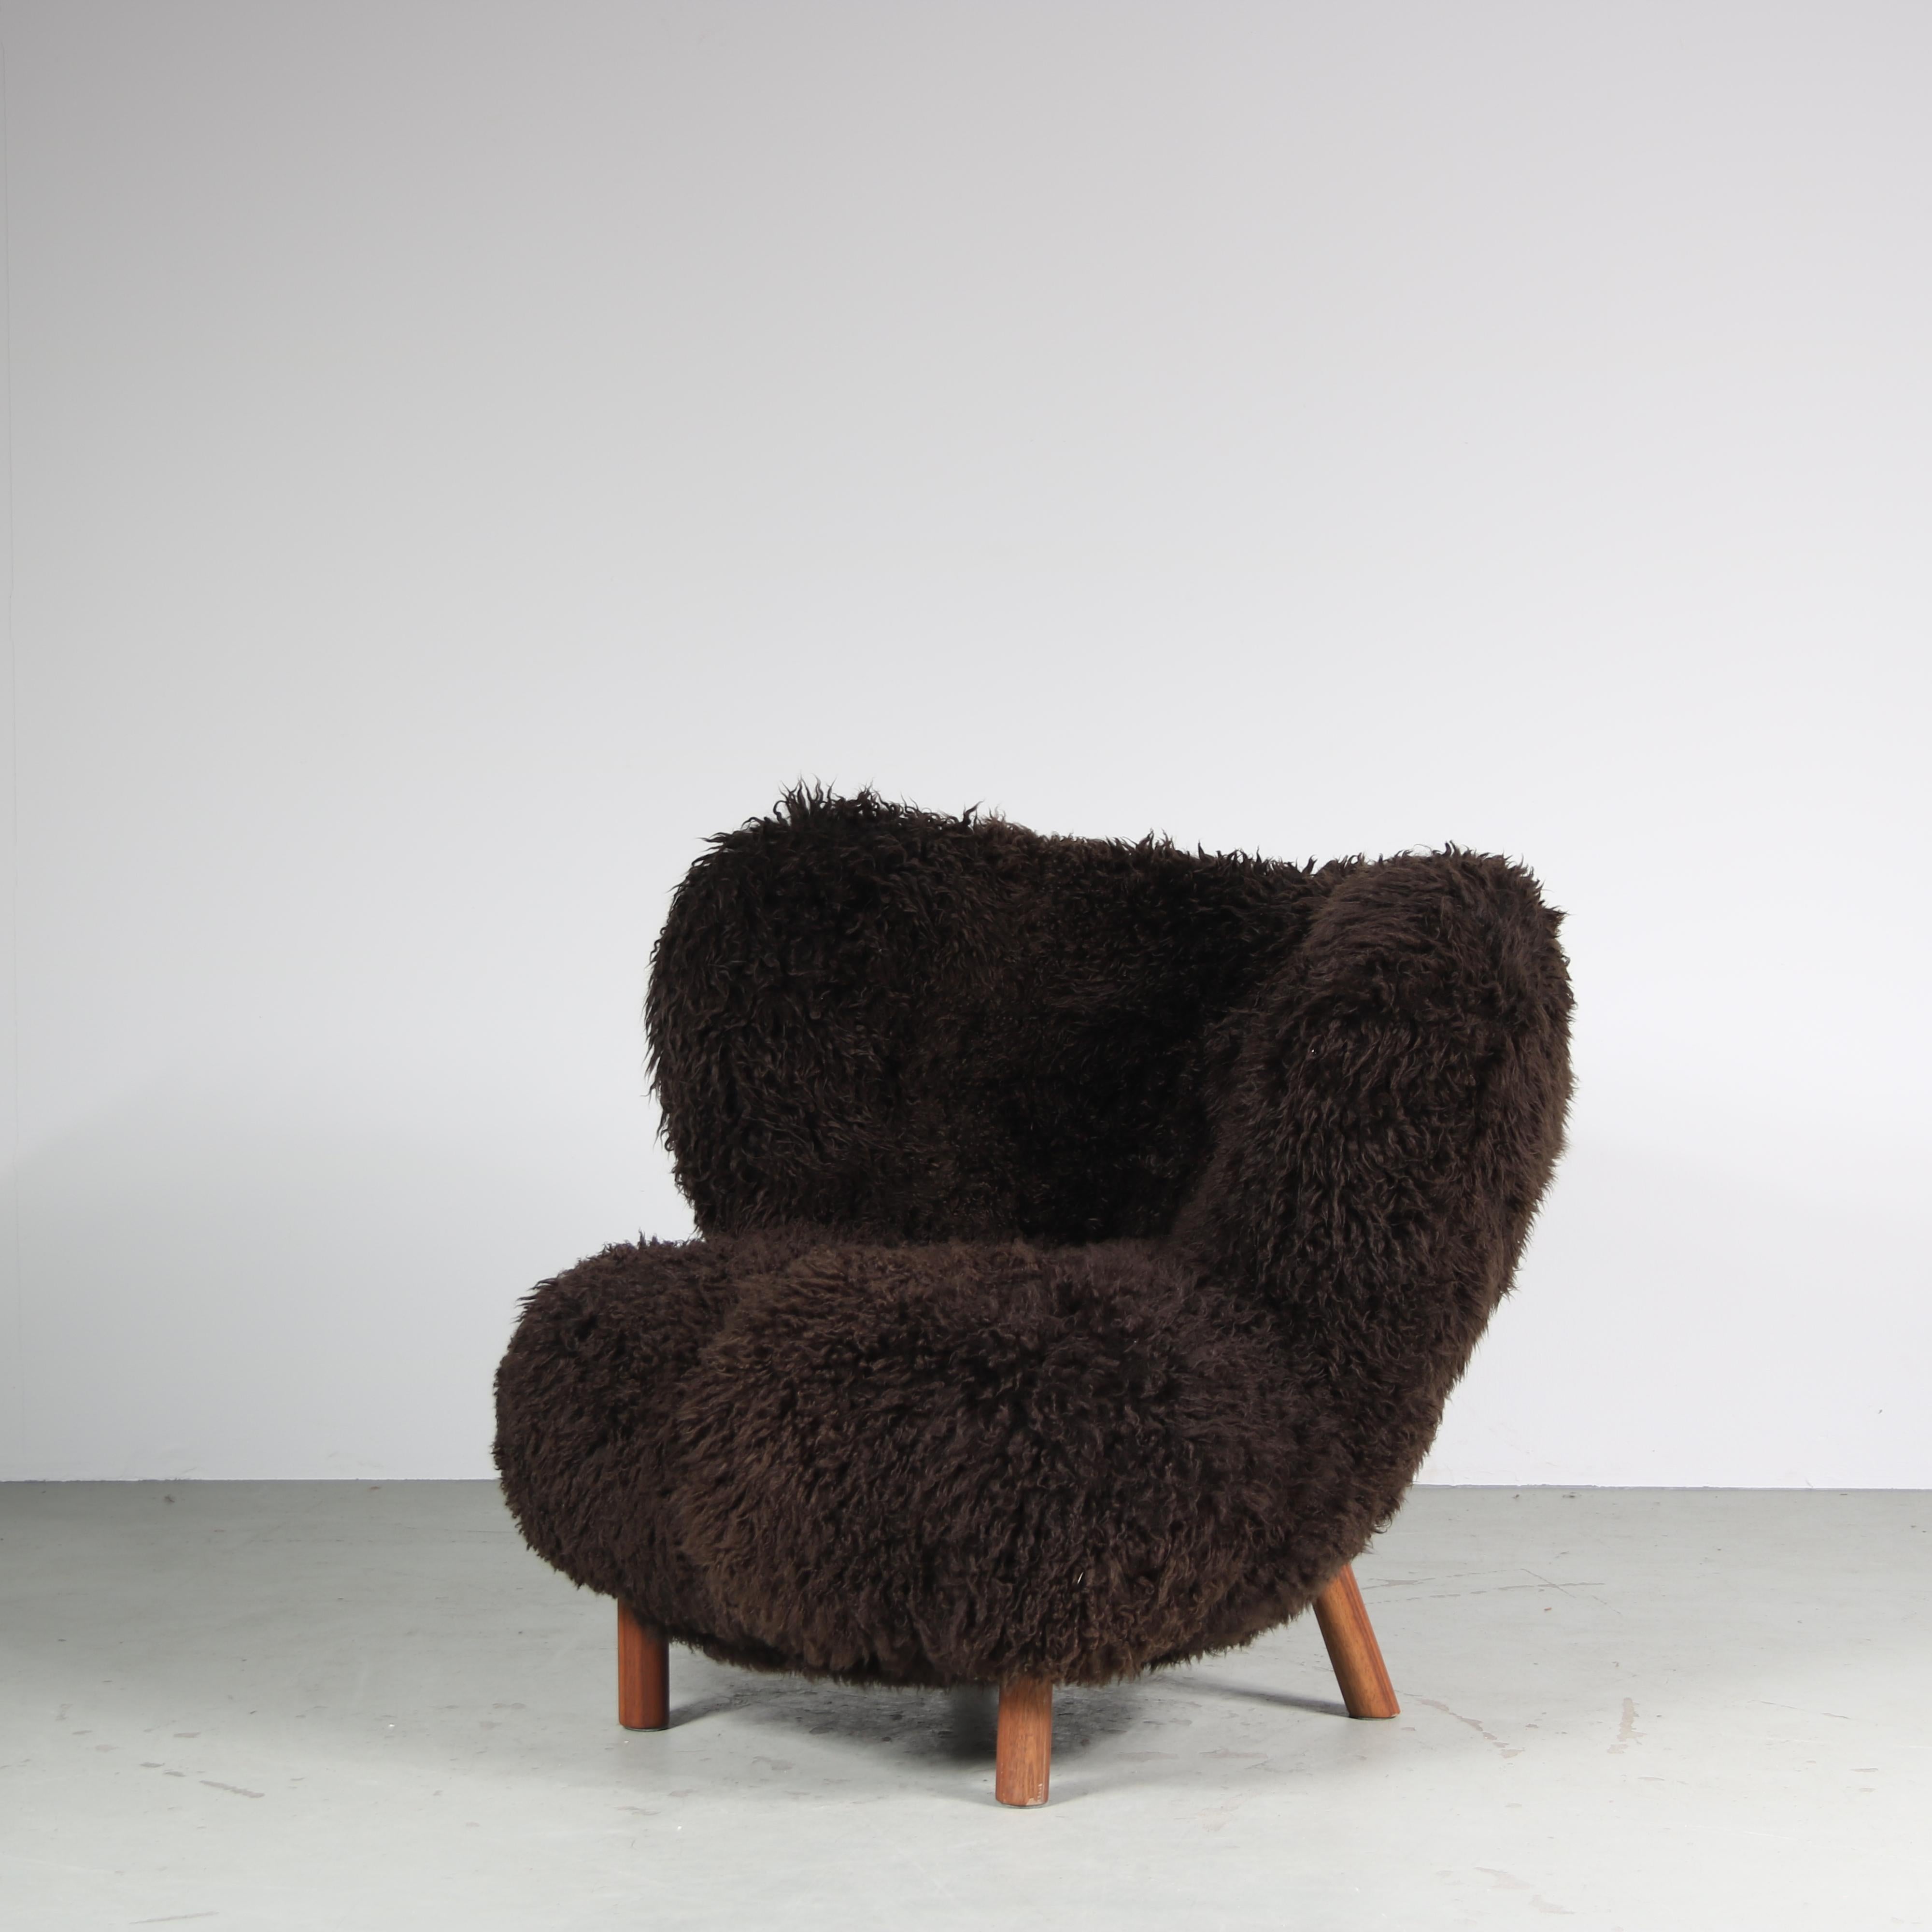 An eye-catching “Little Petra” chair, designed by Viggo Boesen in 1930 and manufactured by & Tradition in Denmark in the 2020s.

This elegant and most inviting chair is indeed as comfortable as it looks! The thick, dark brown sheepskin upholstery is